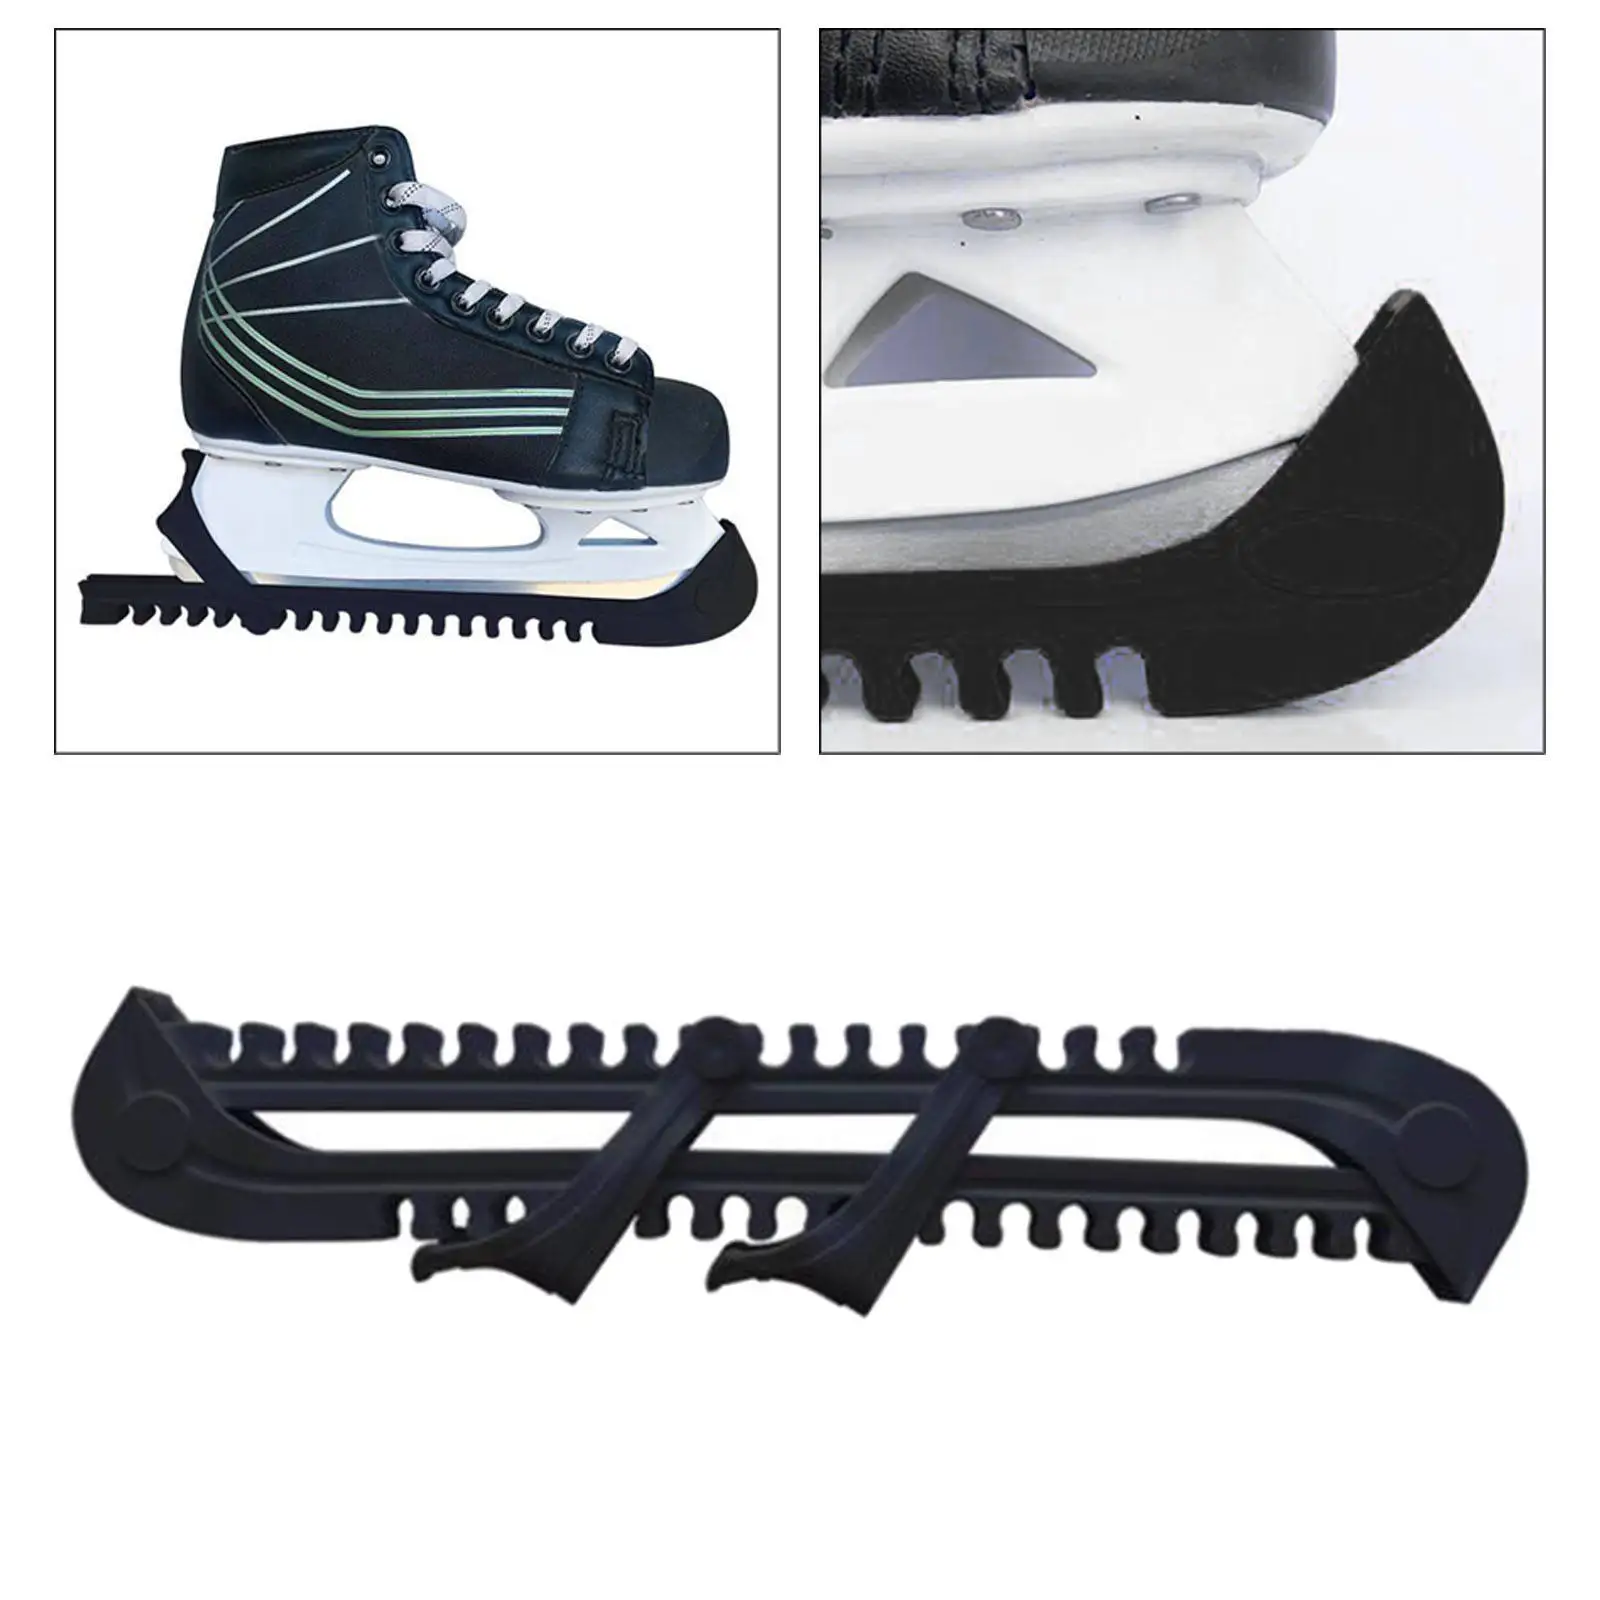 Skate Blade Guards Soft Accessory Premium Plastic Ice Figure Skating Repalcement Parts Protective Ice Skates Protect Sleeve